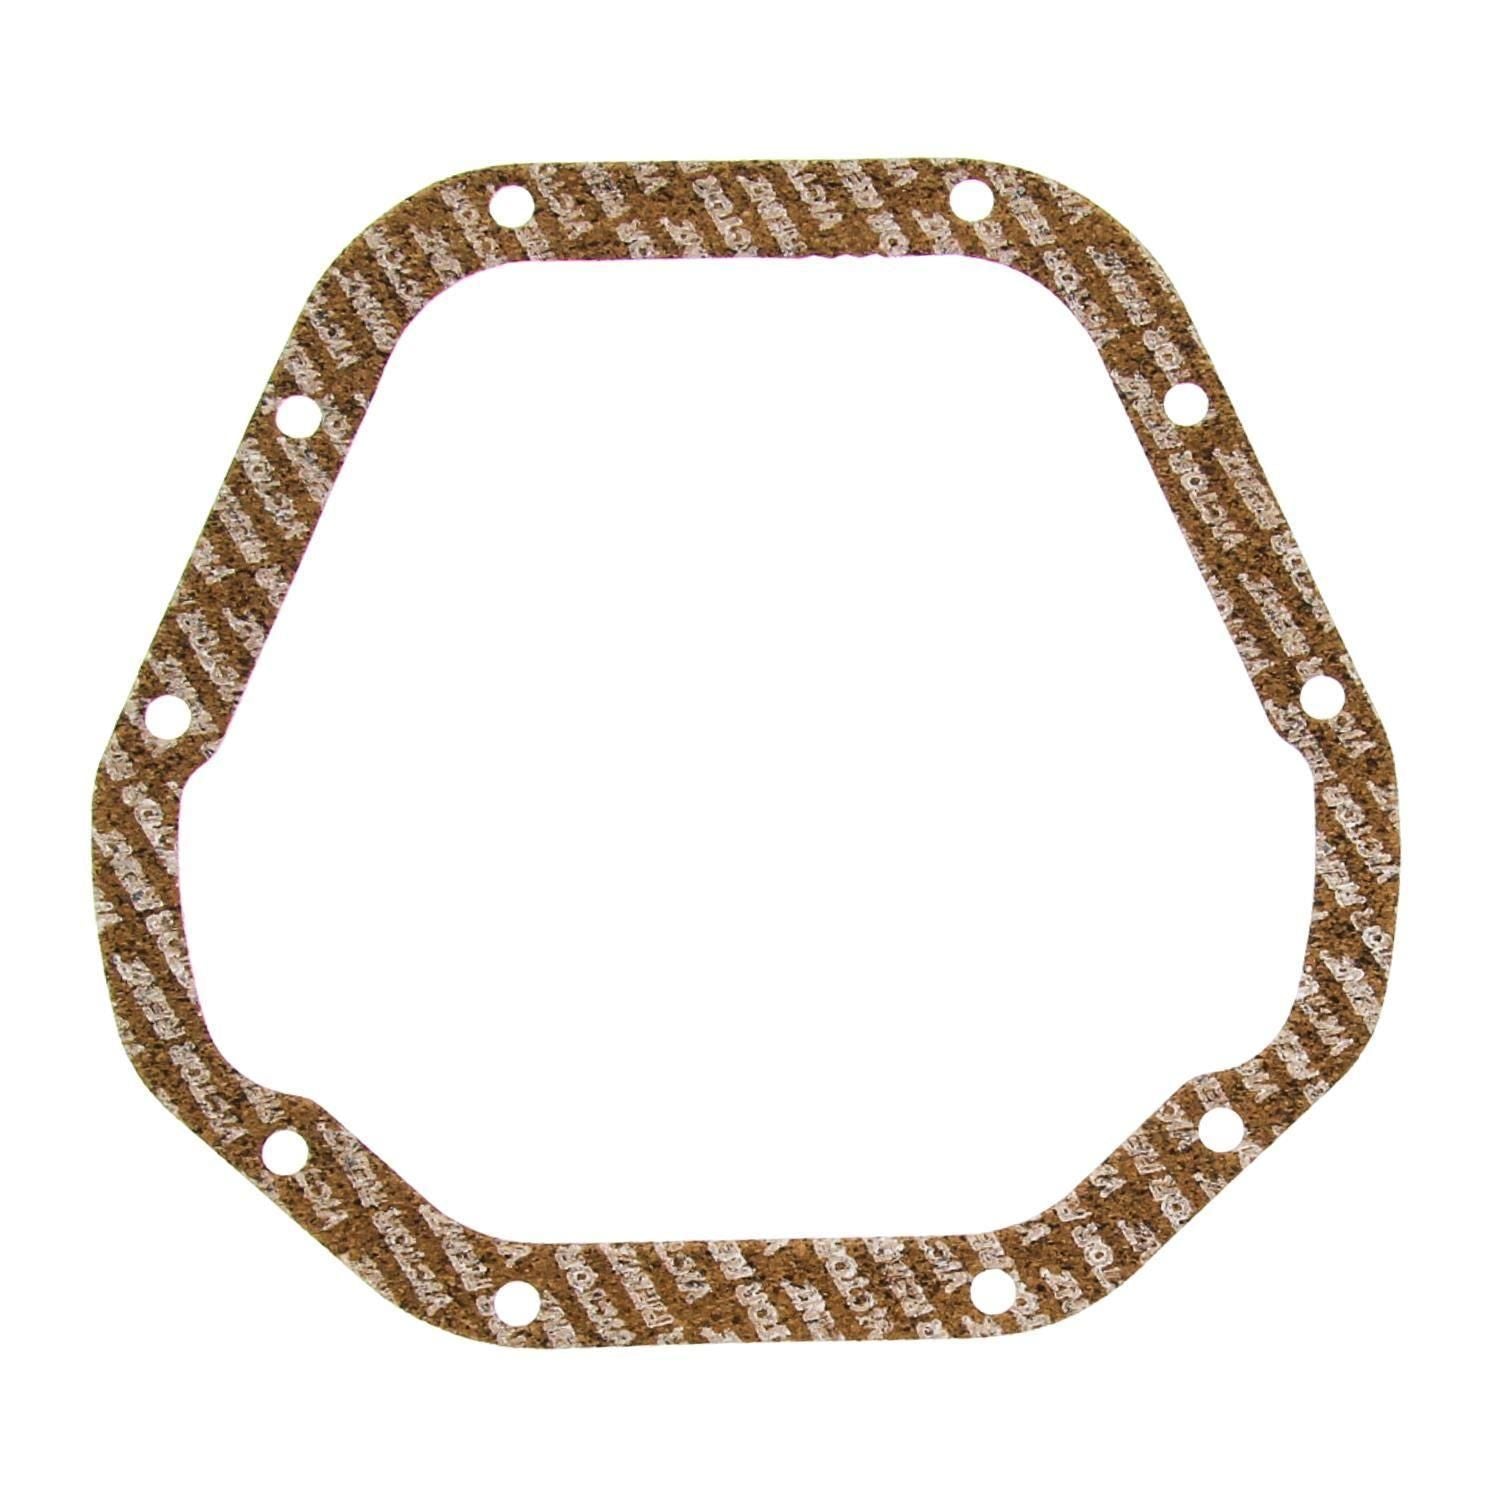 MAHLE Axle Housing Cover Gasket P18562TC